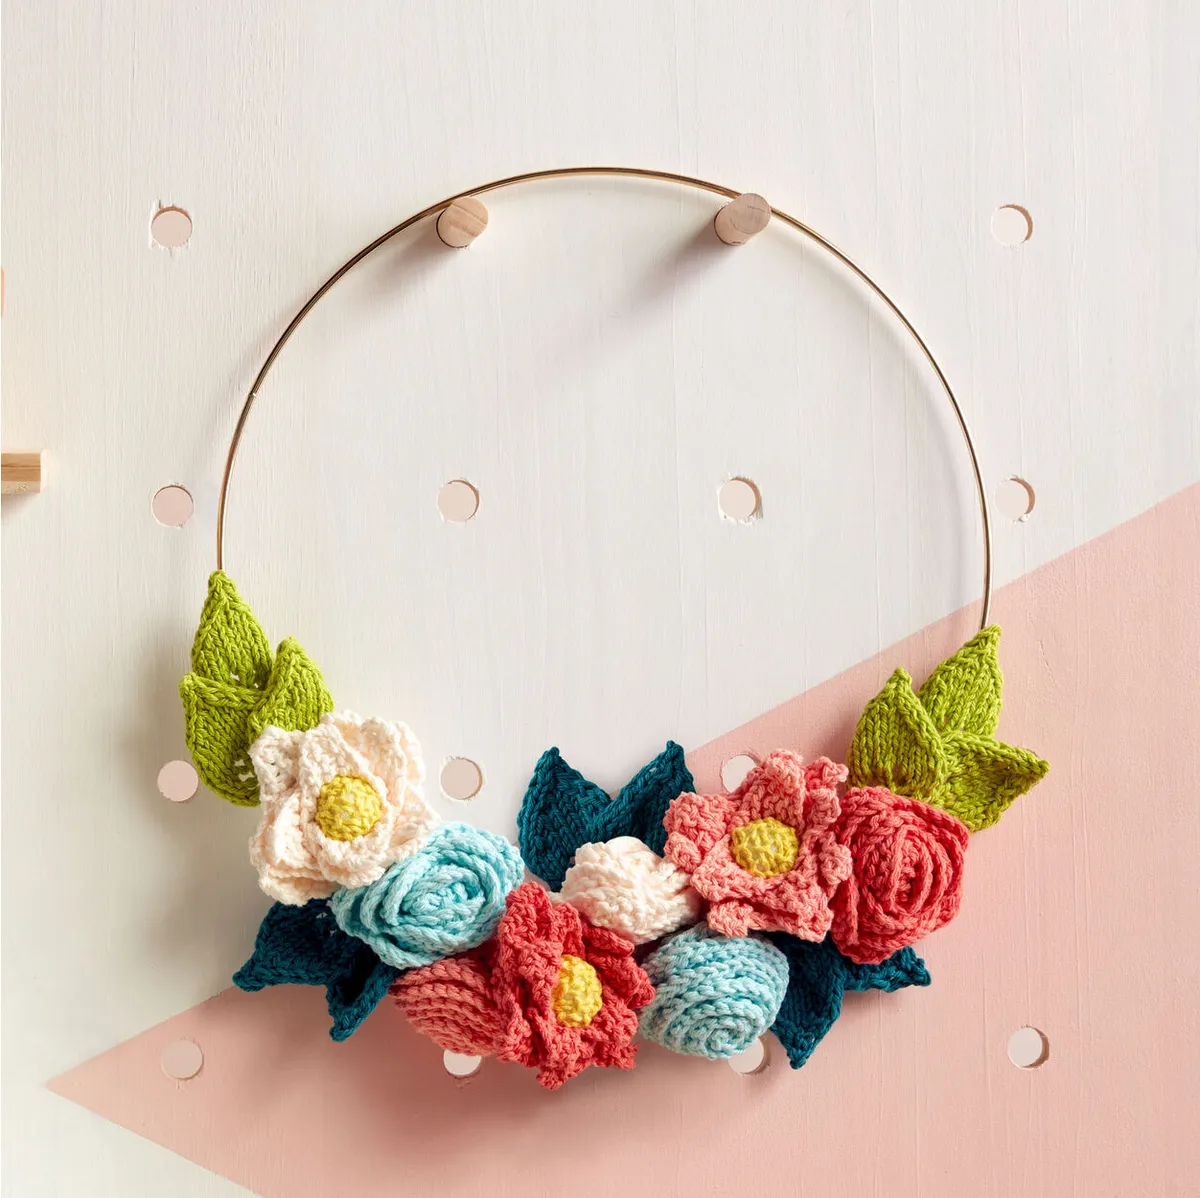 knitted flower patterns easy free wreath